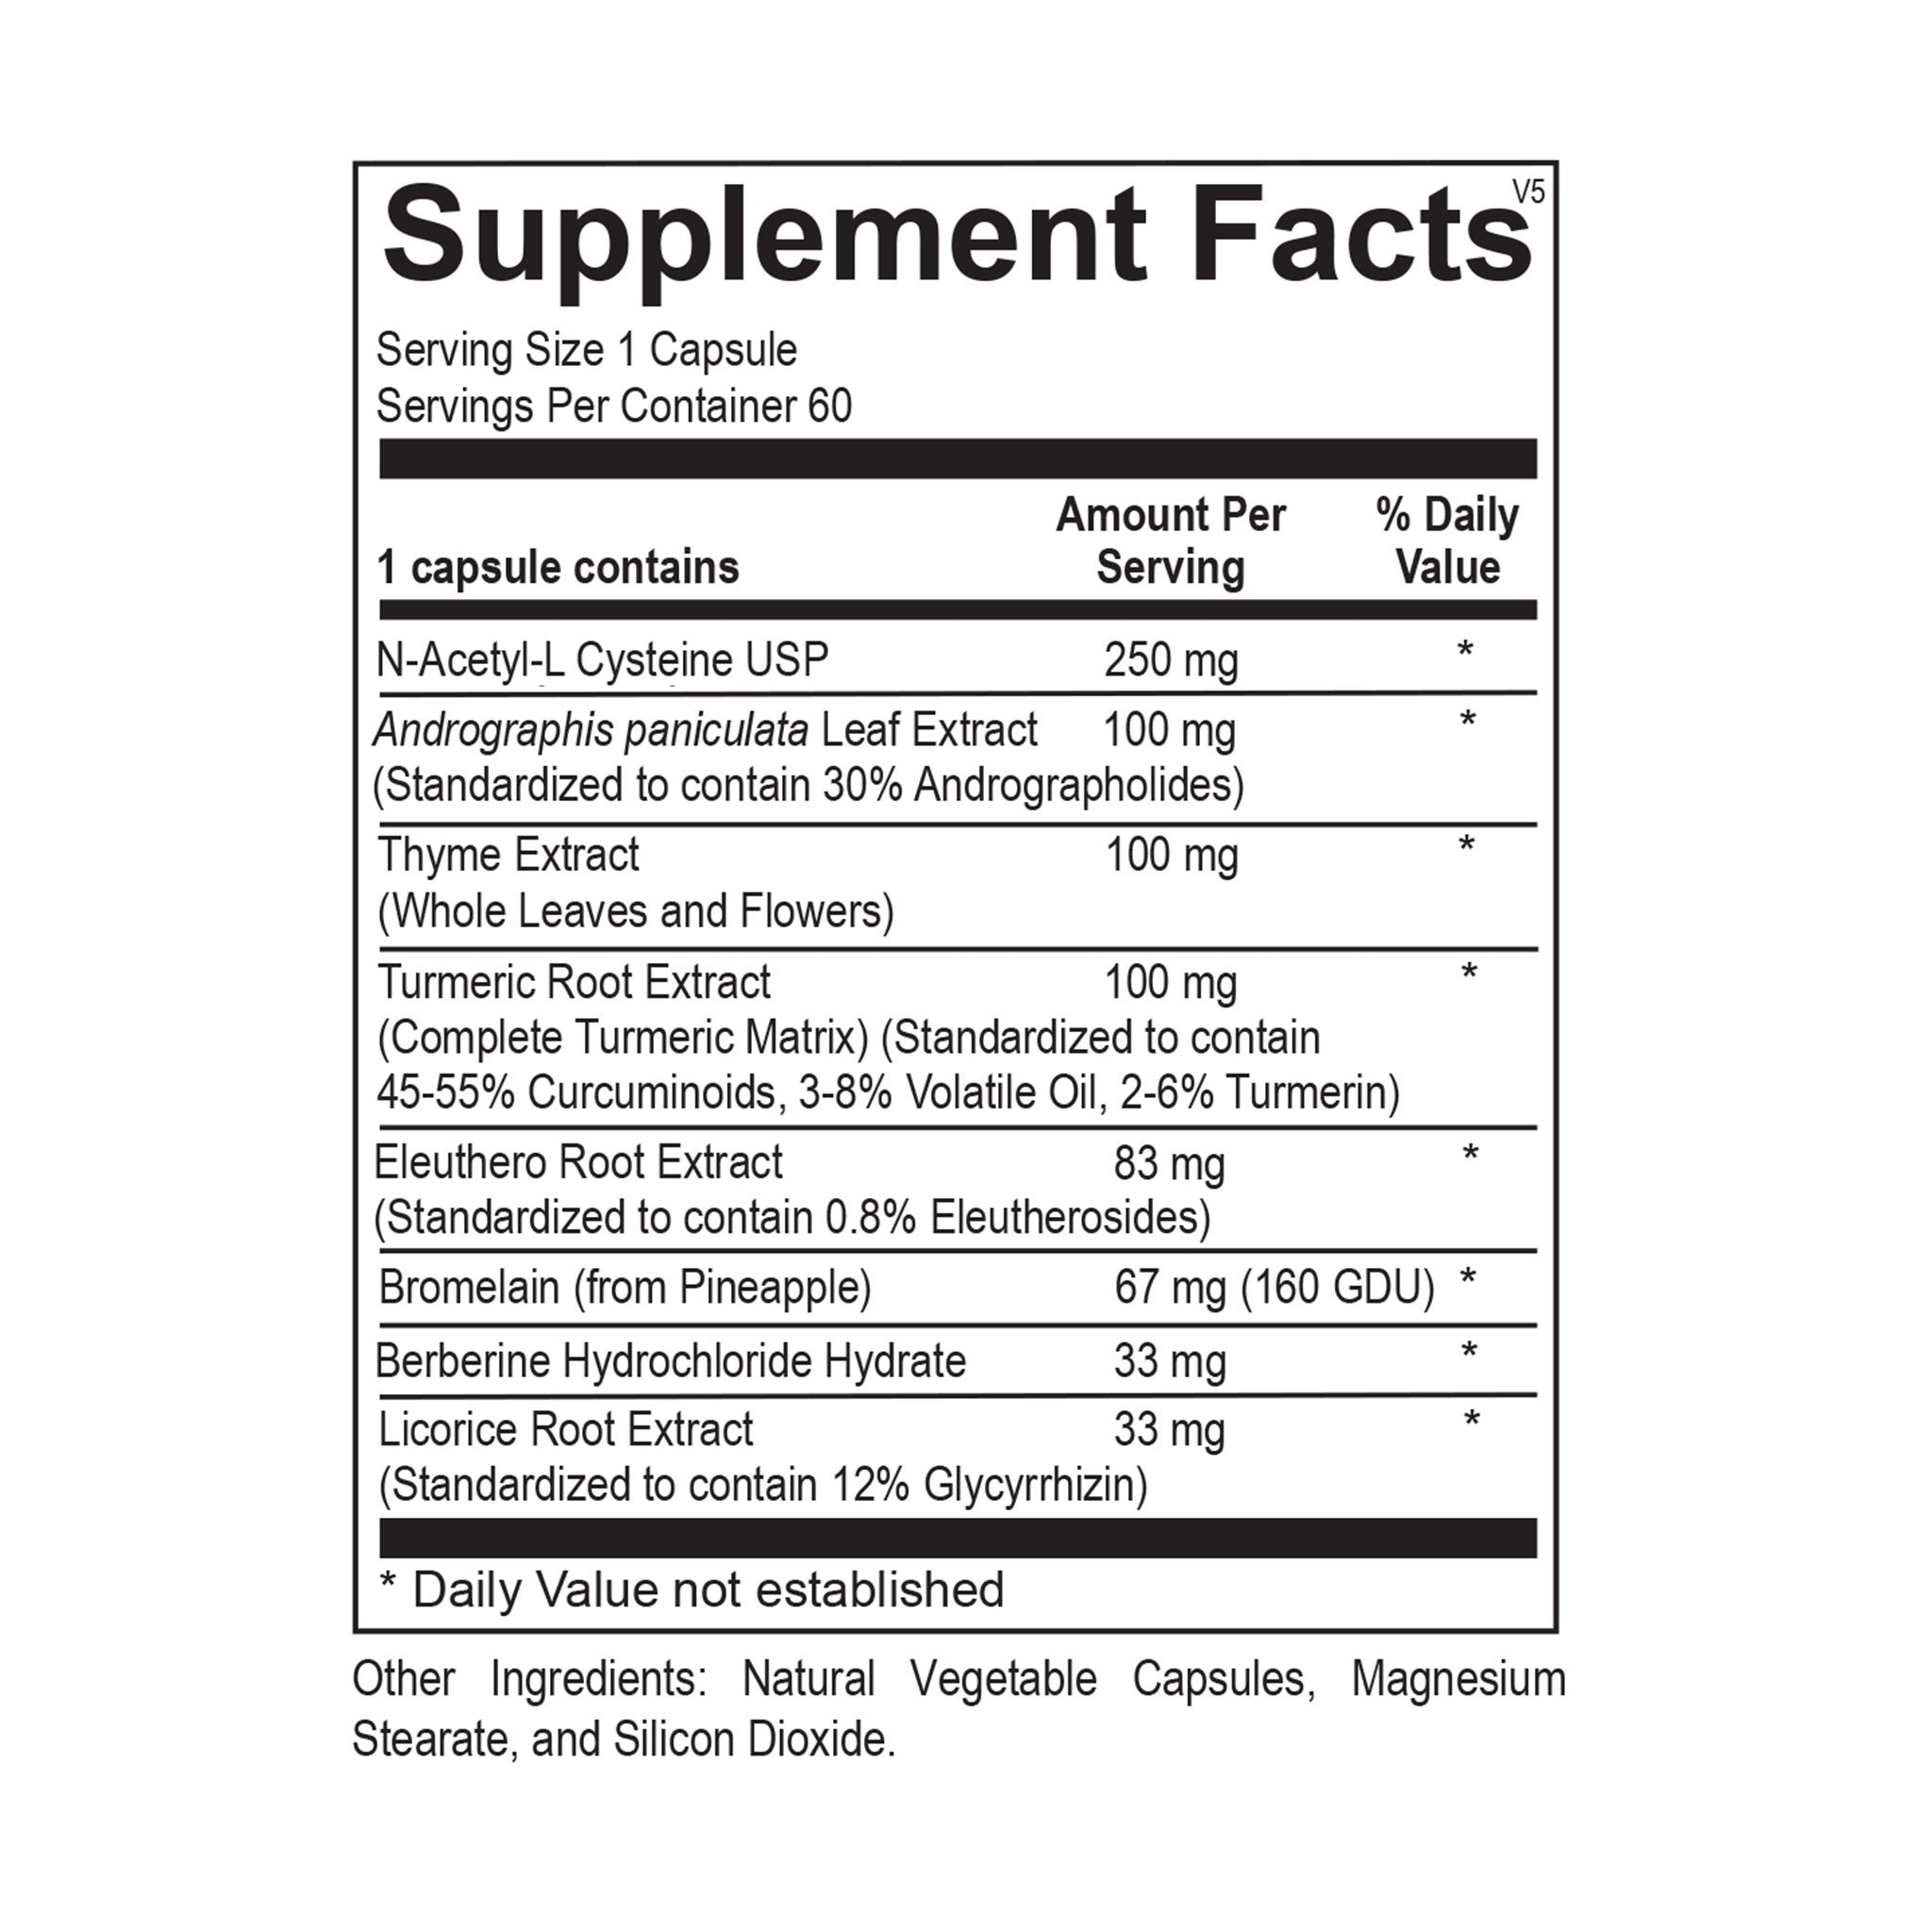 Supplement Facts for Sinu Plus 